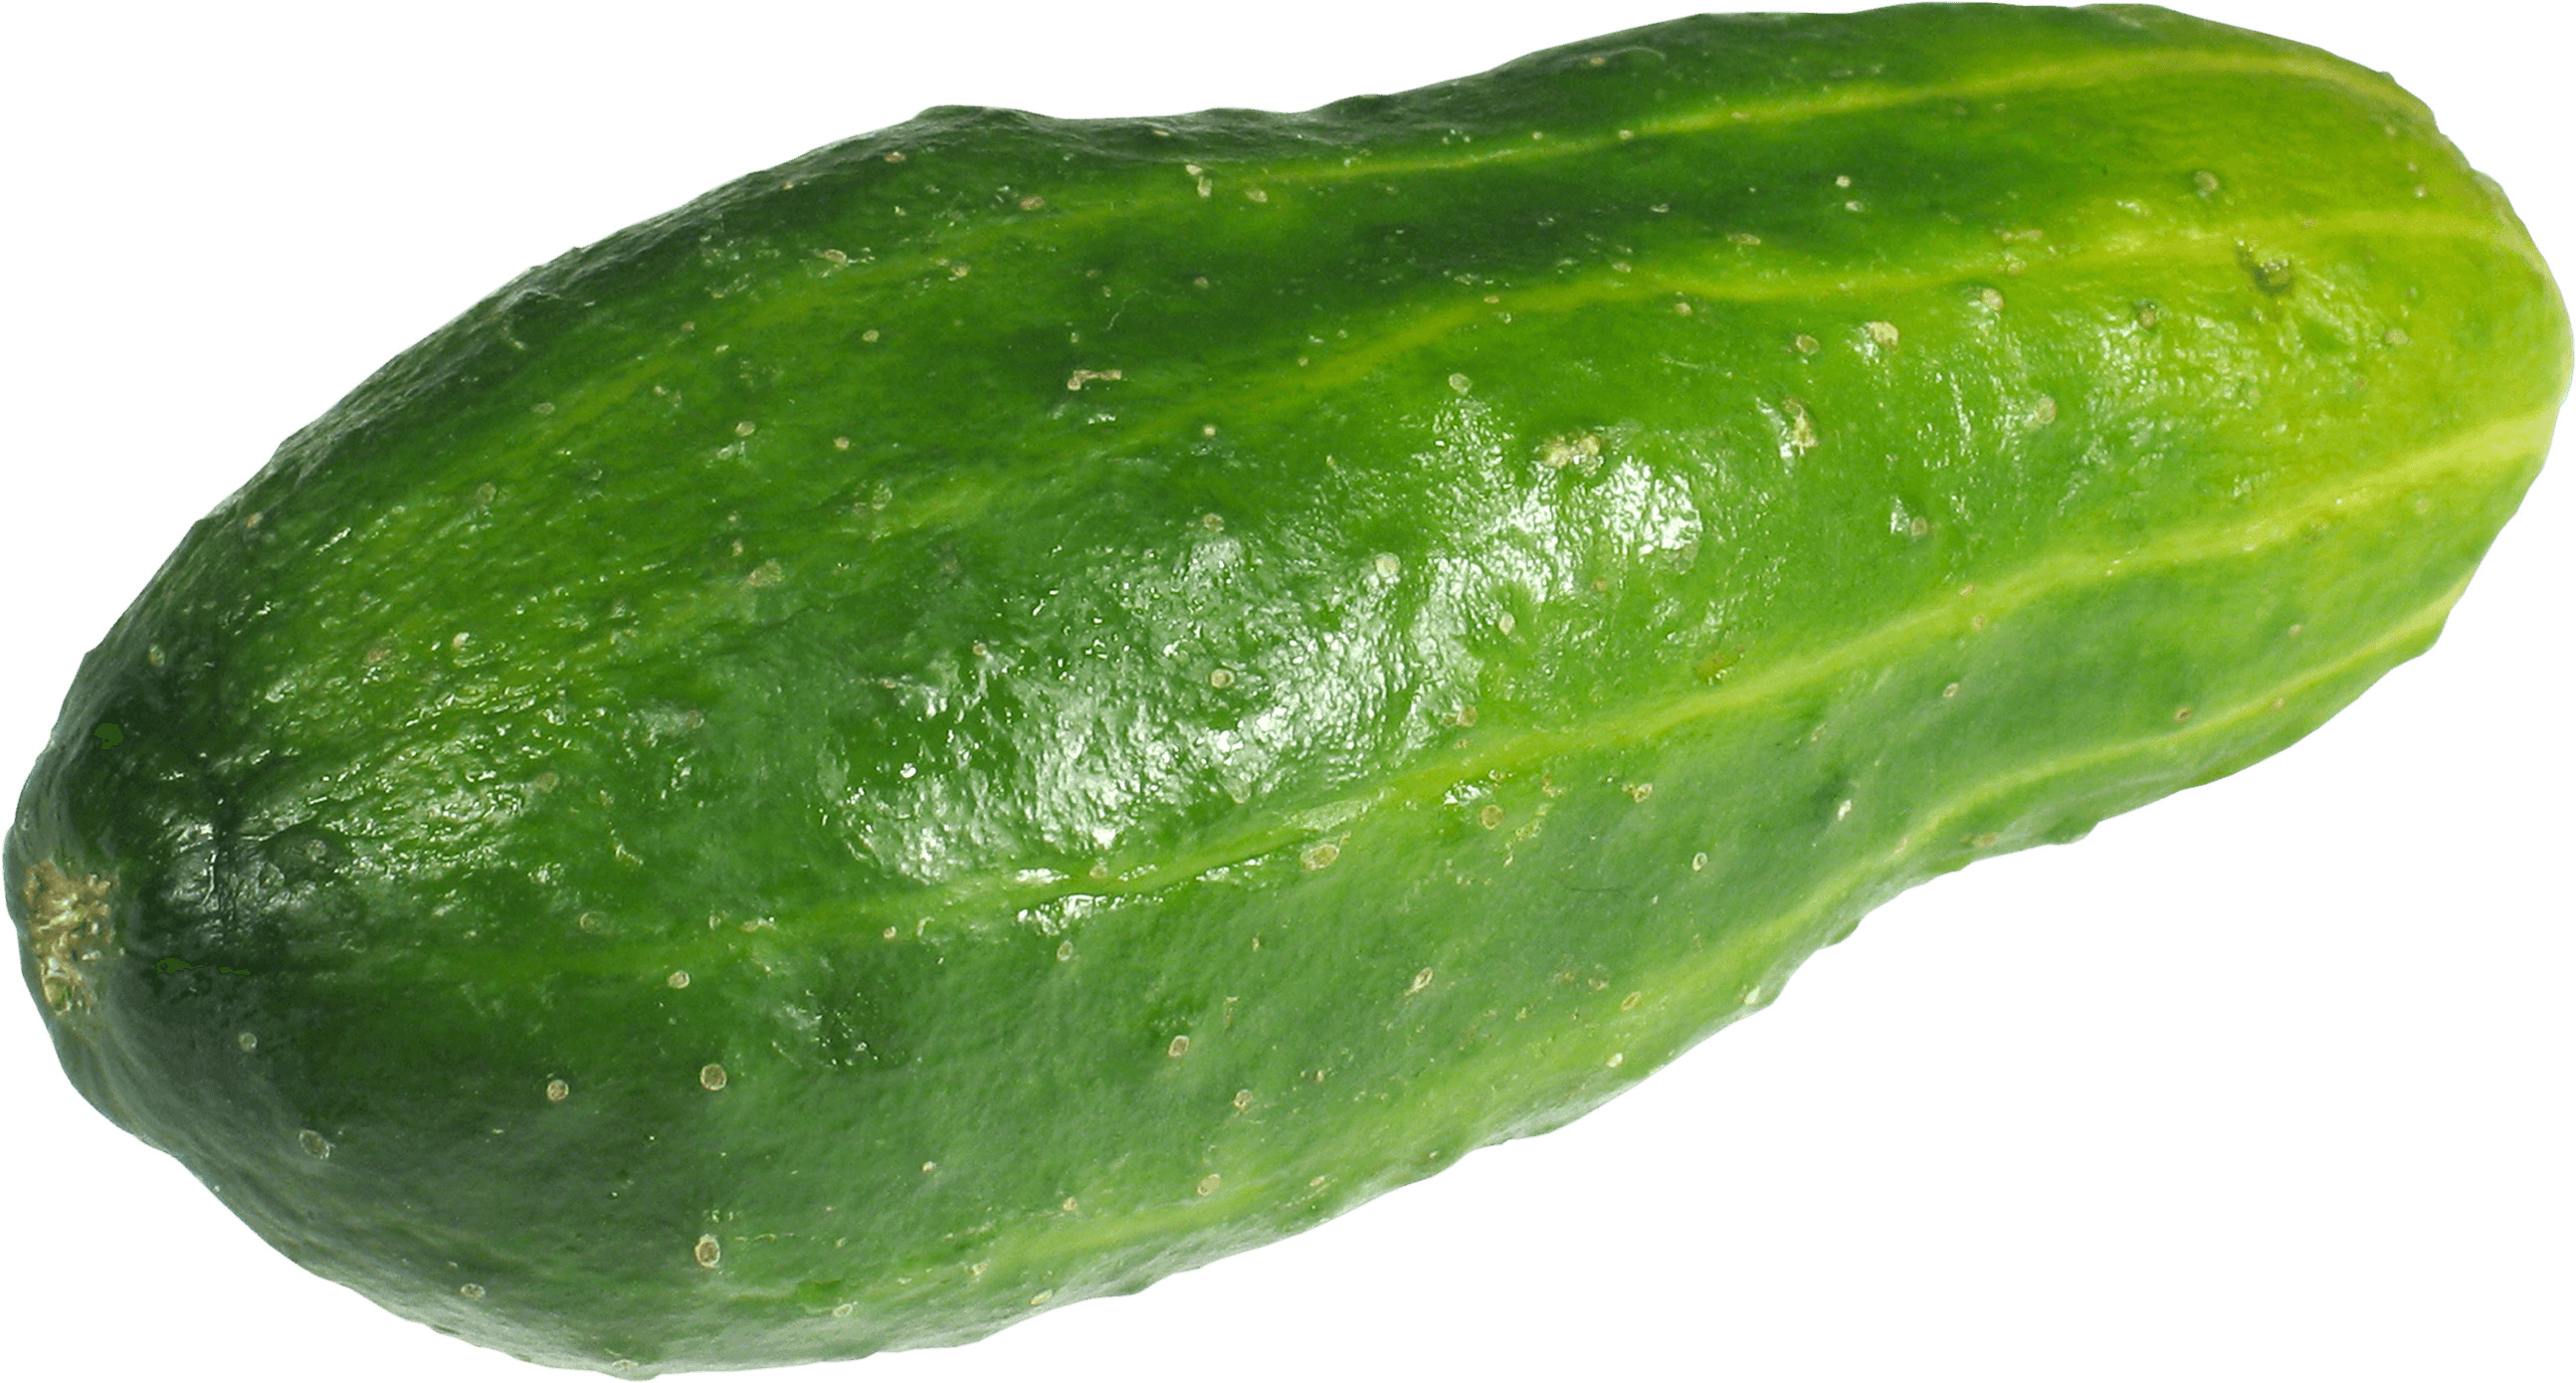 Large Green Cucumber png